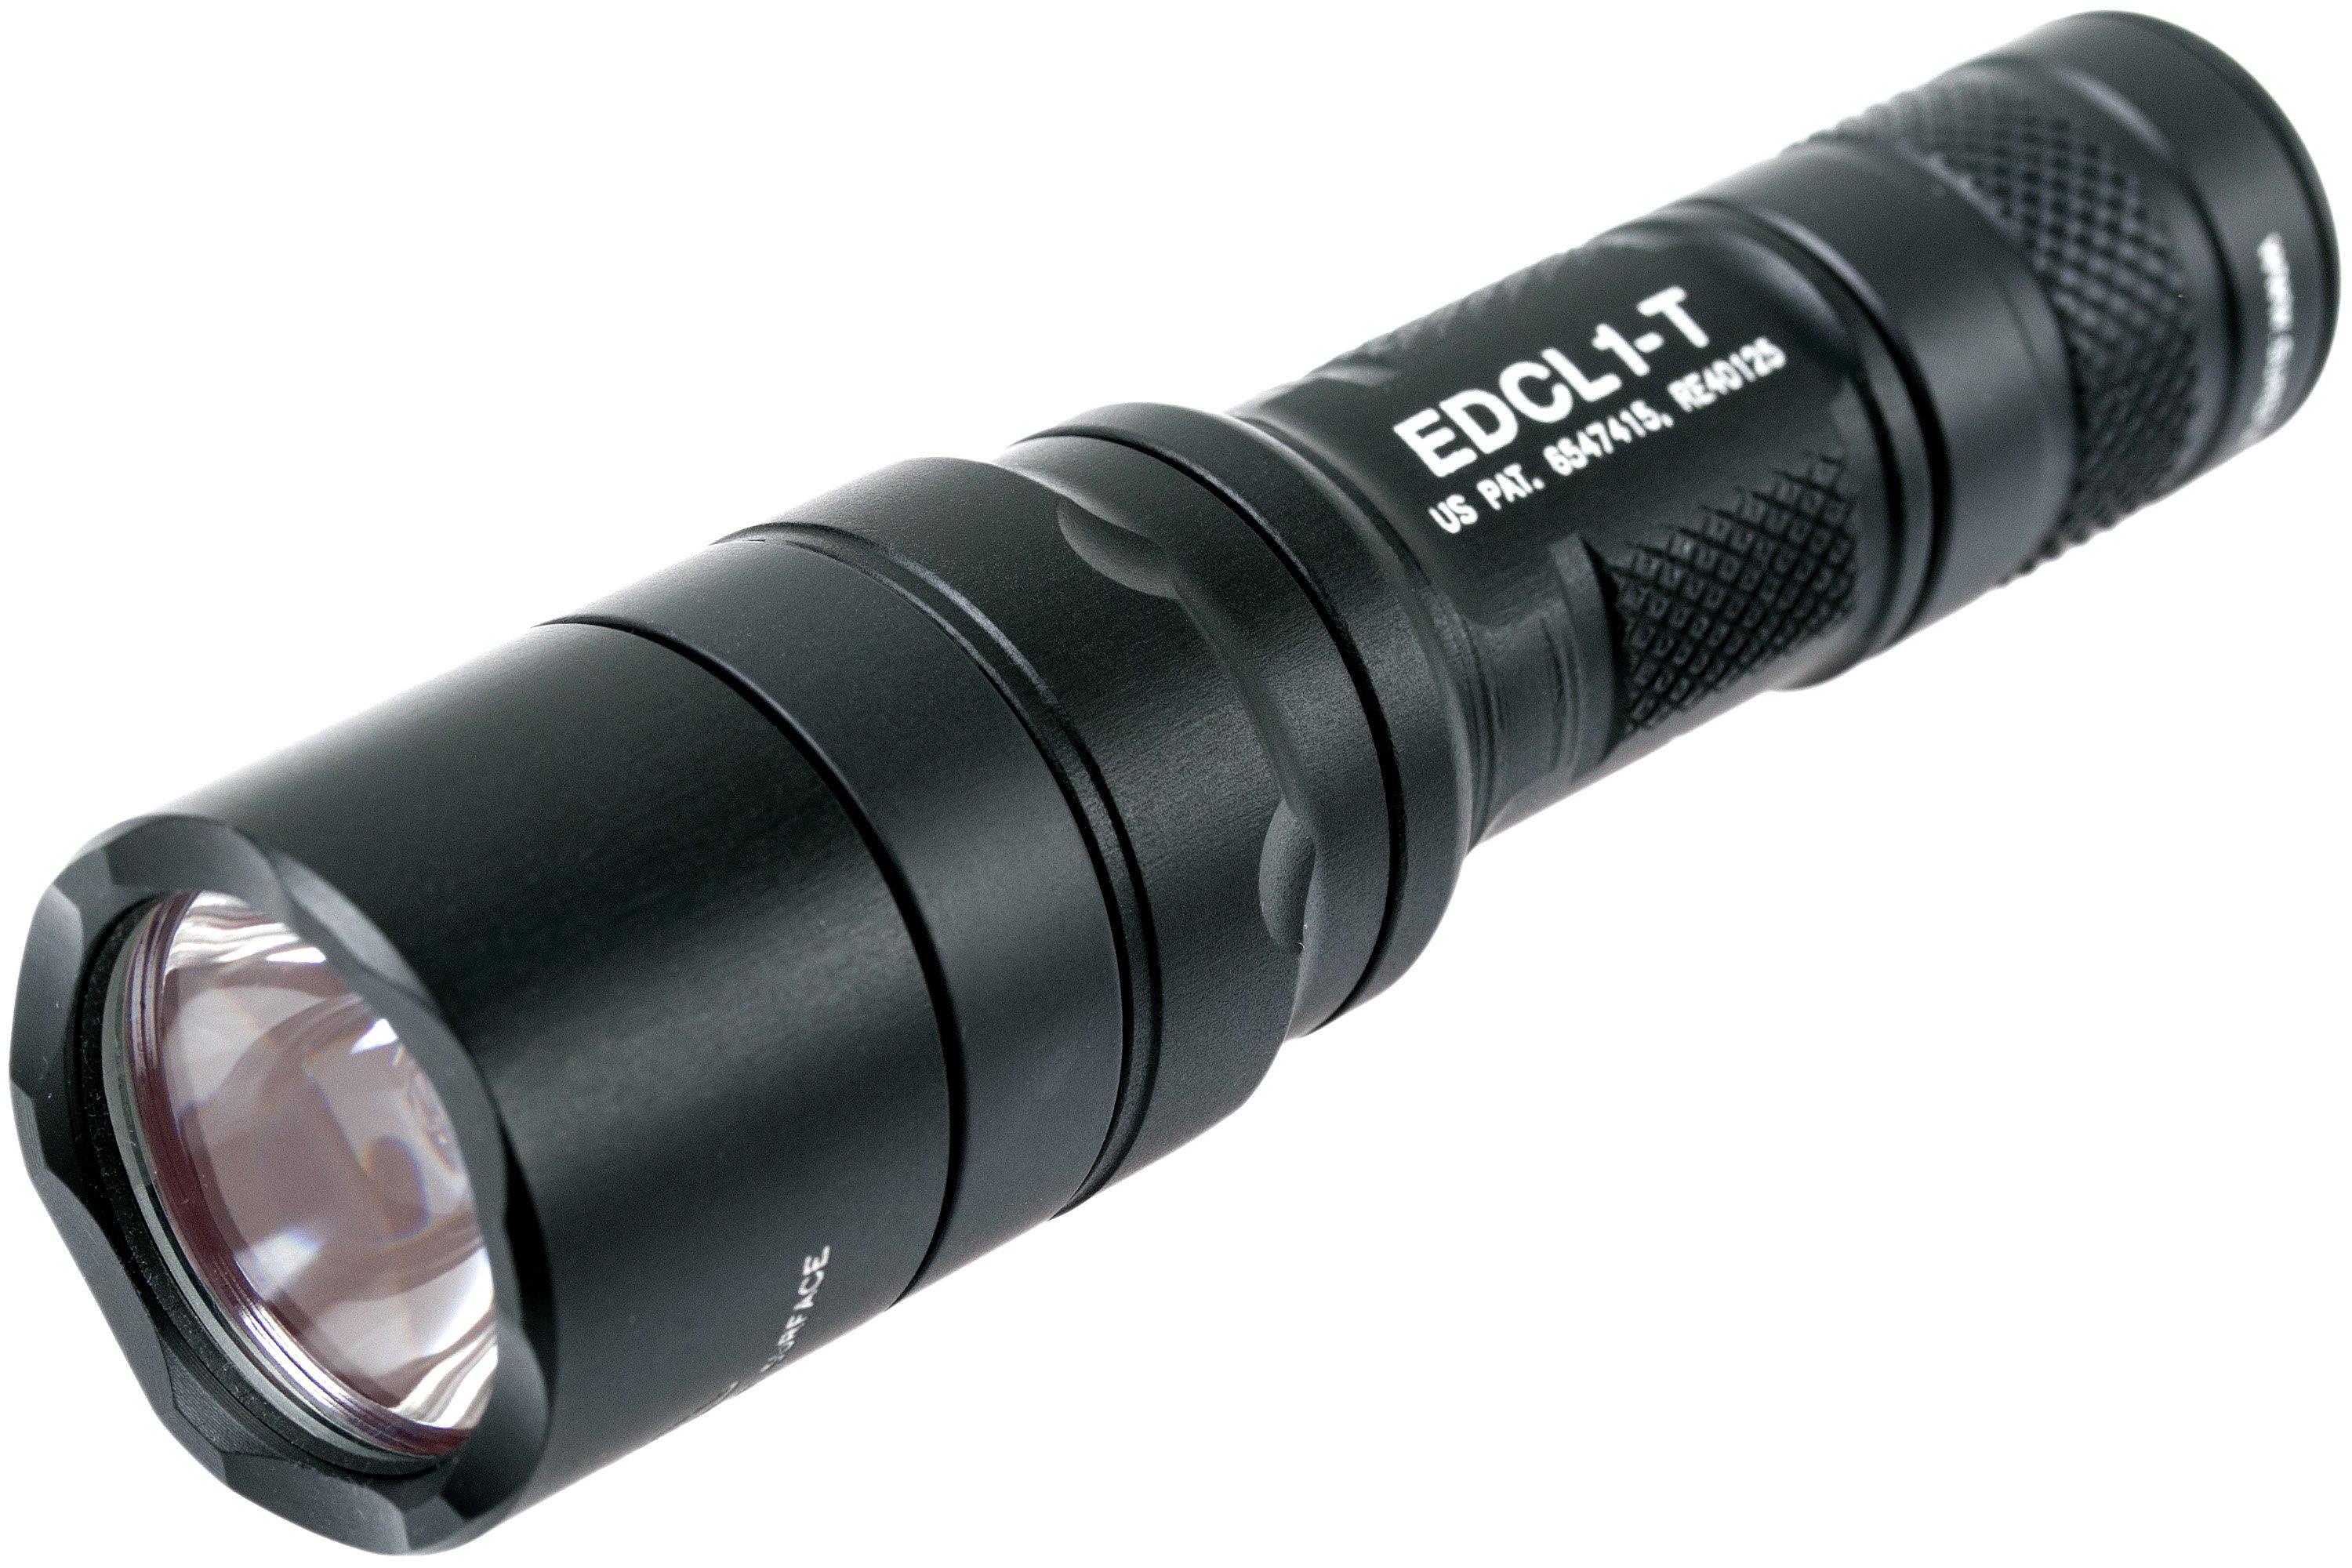 SureFire EDCL1-T Everyday Carry Tactical LED Flashlight 500 Lumens Includes  X CR123A